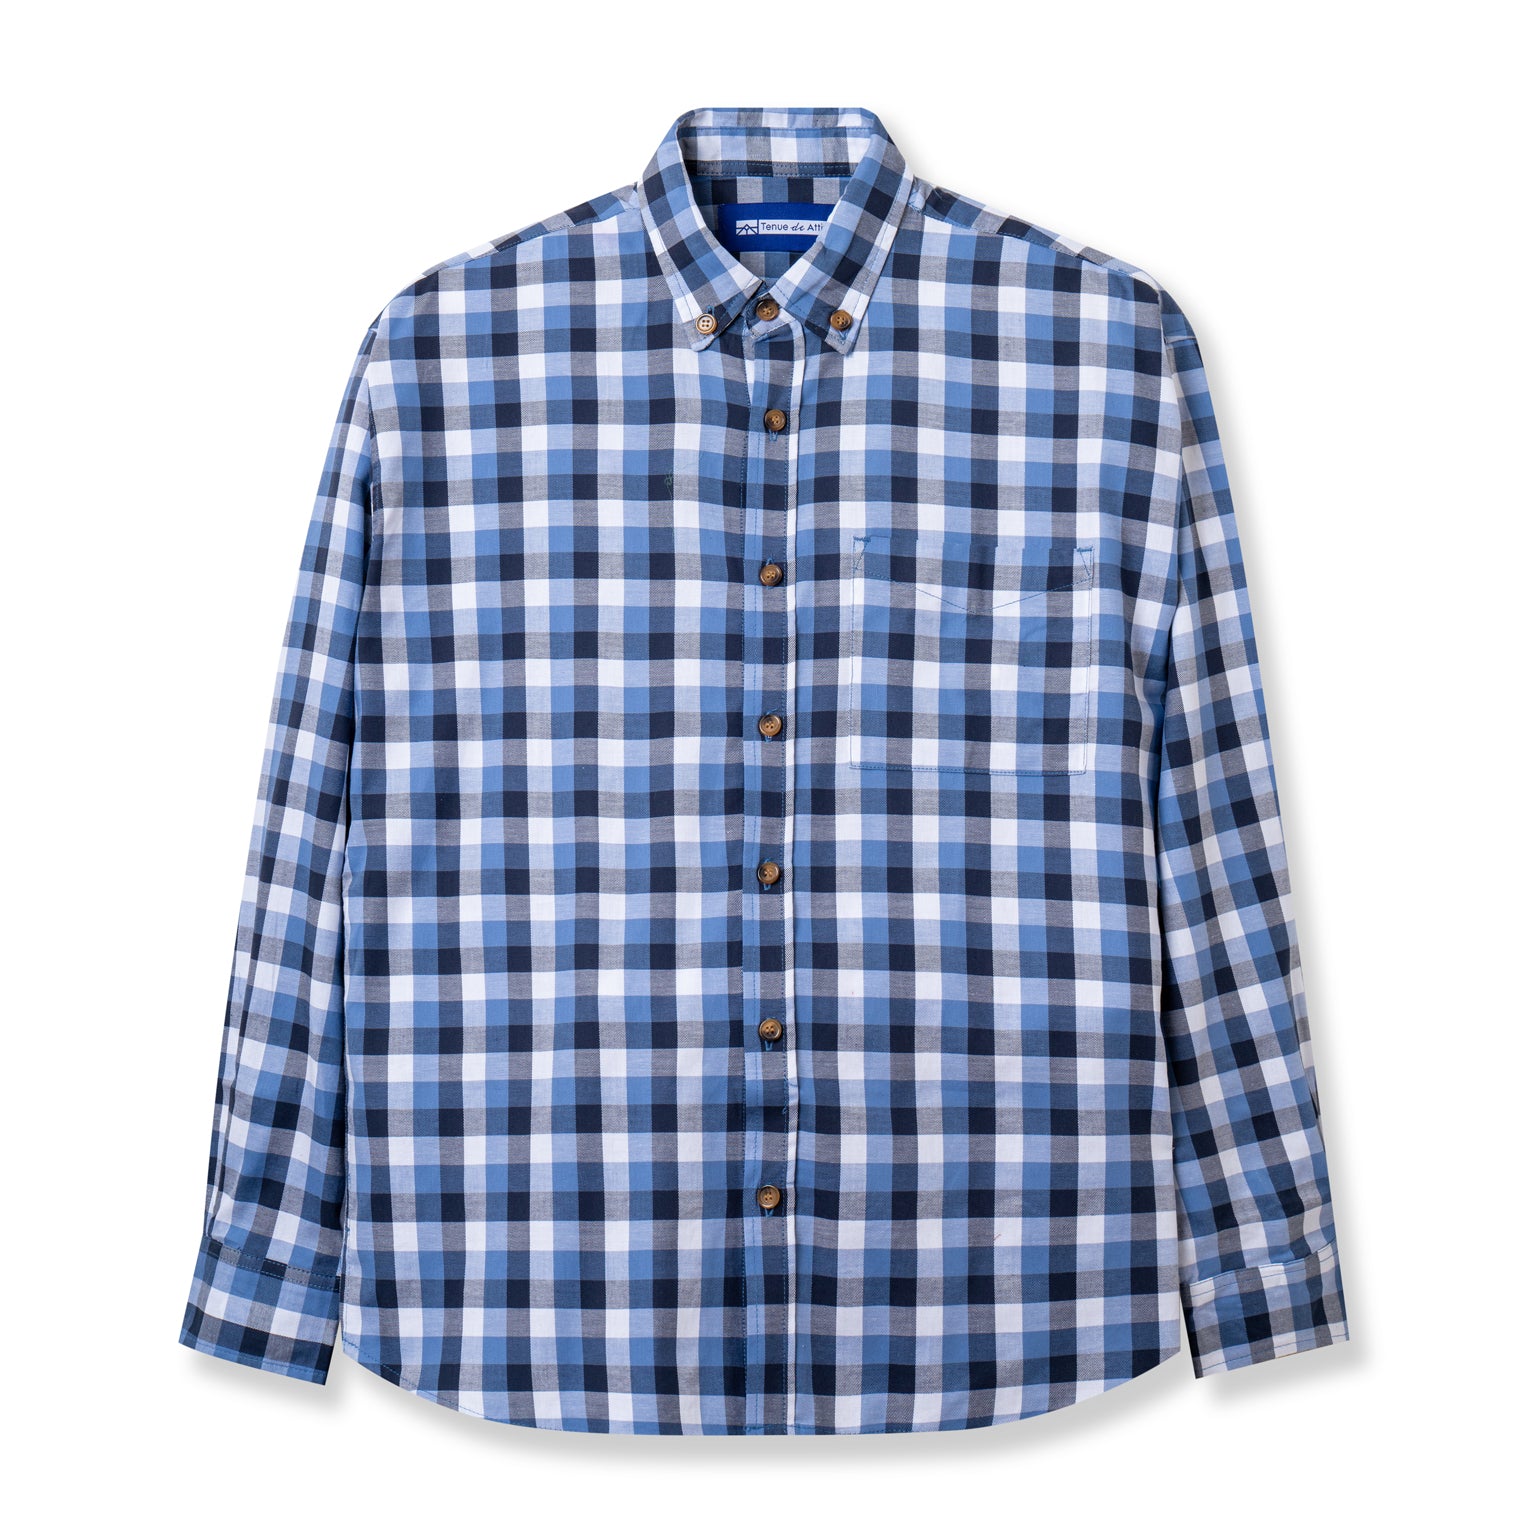 Flannel Long Sleeve Shirt - Squared Blue